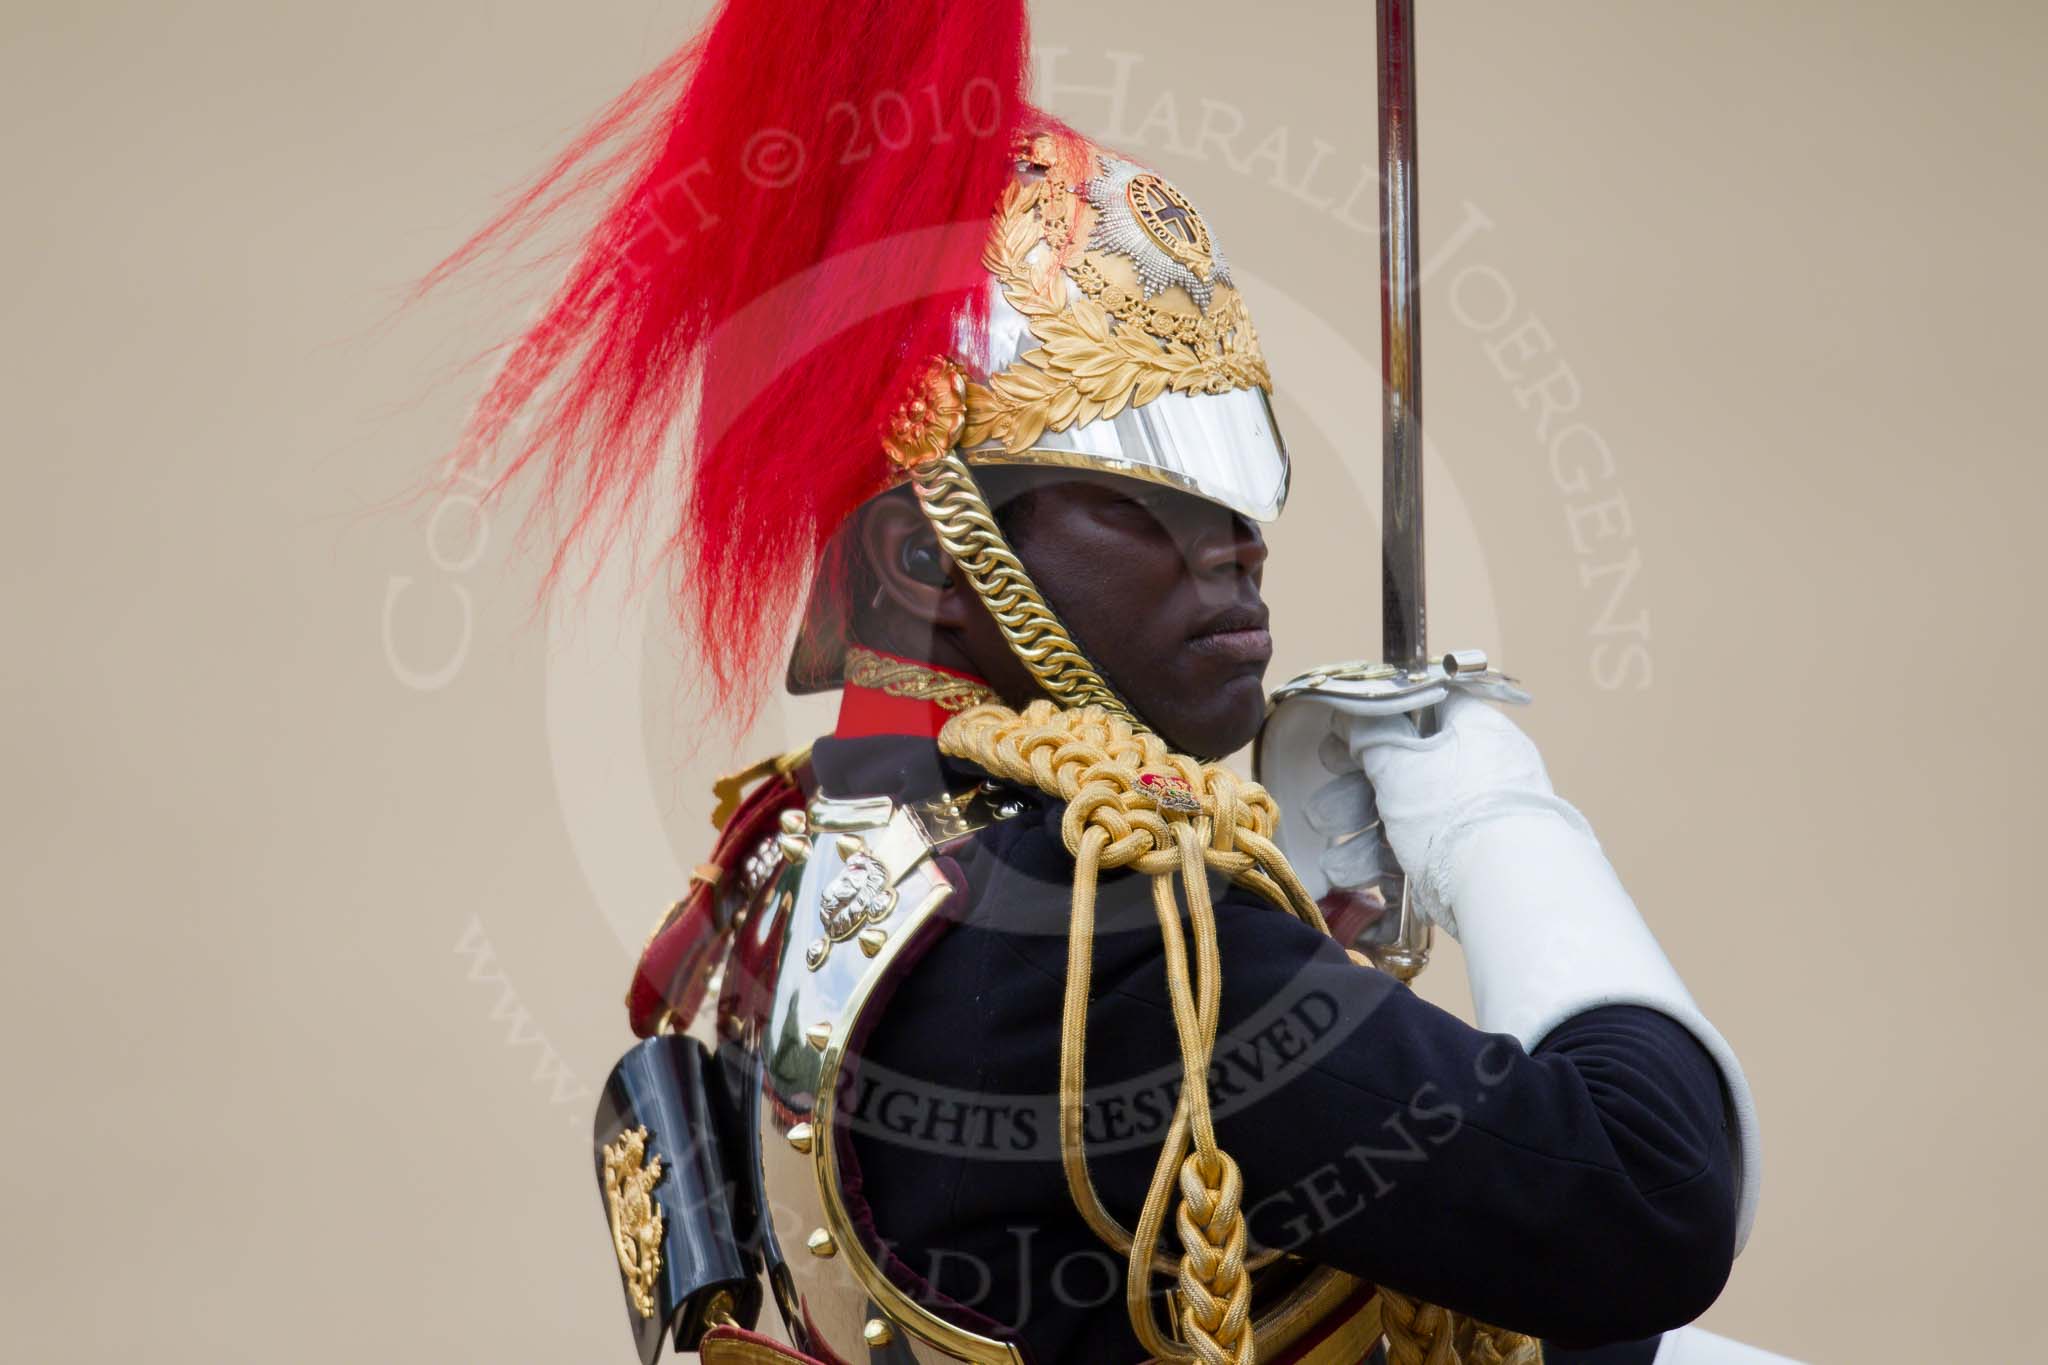 Trooping the Colour 2010: Field Officer of the Escort, Major N K Twumasi Ankrah, The Blues and Royals, during the Ride Past.

Most impressive are the reflections on his shield, especially when seen at full size!.
Horse Guards Parade, Westminster,
London SW1,
Greater London,
United Kingdom,
on 12 June 2010 at 11:56, image #173